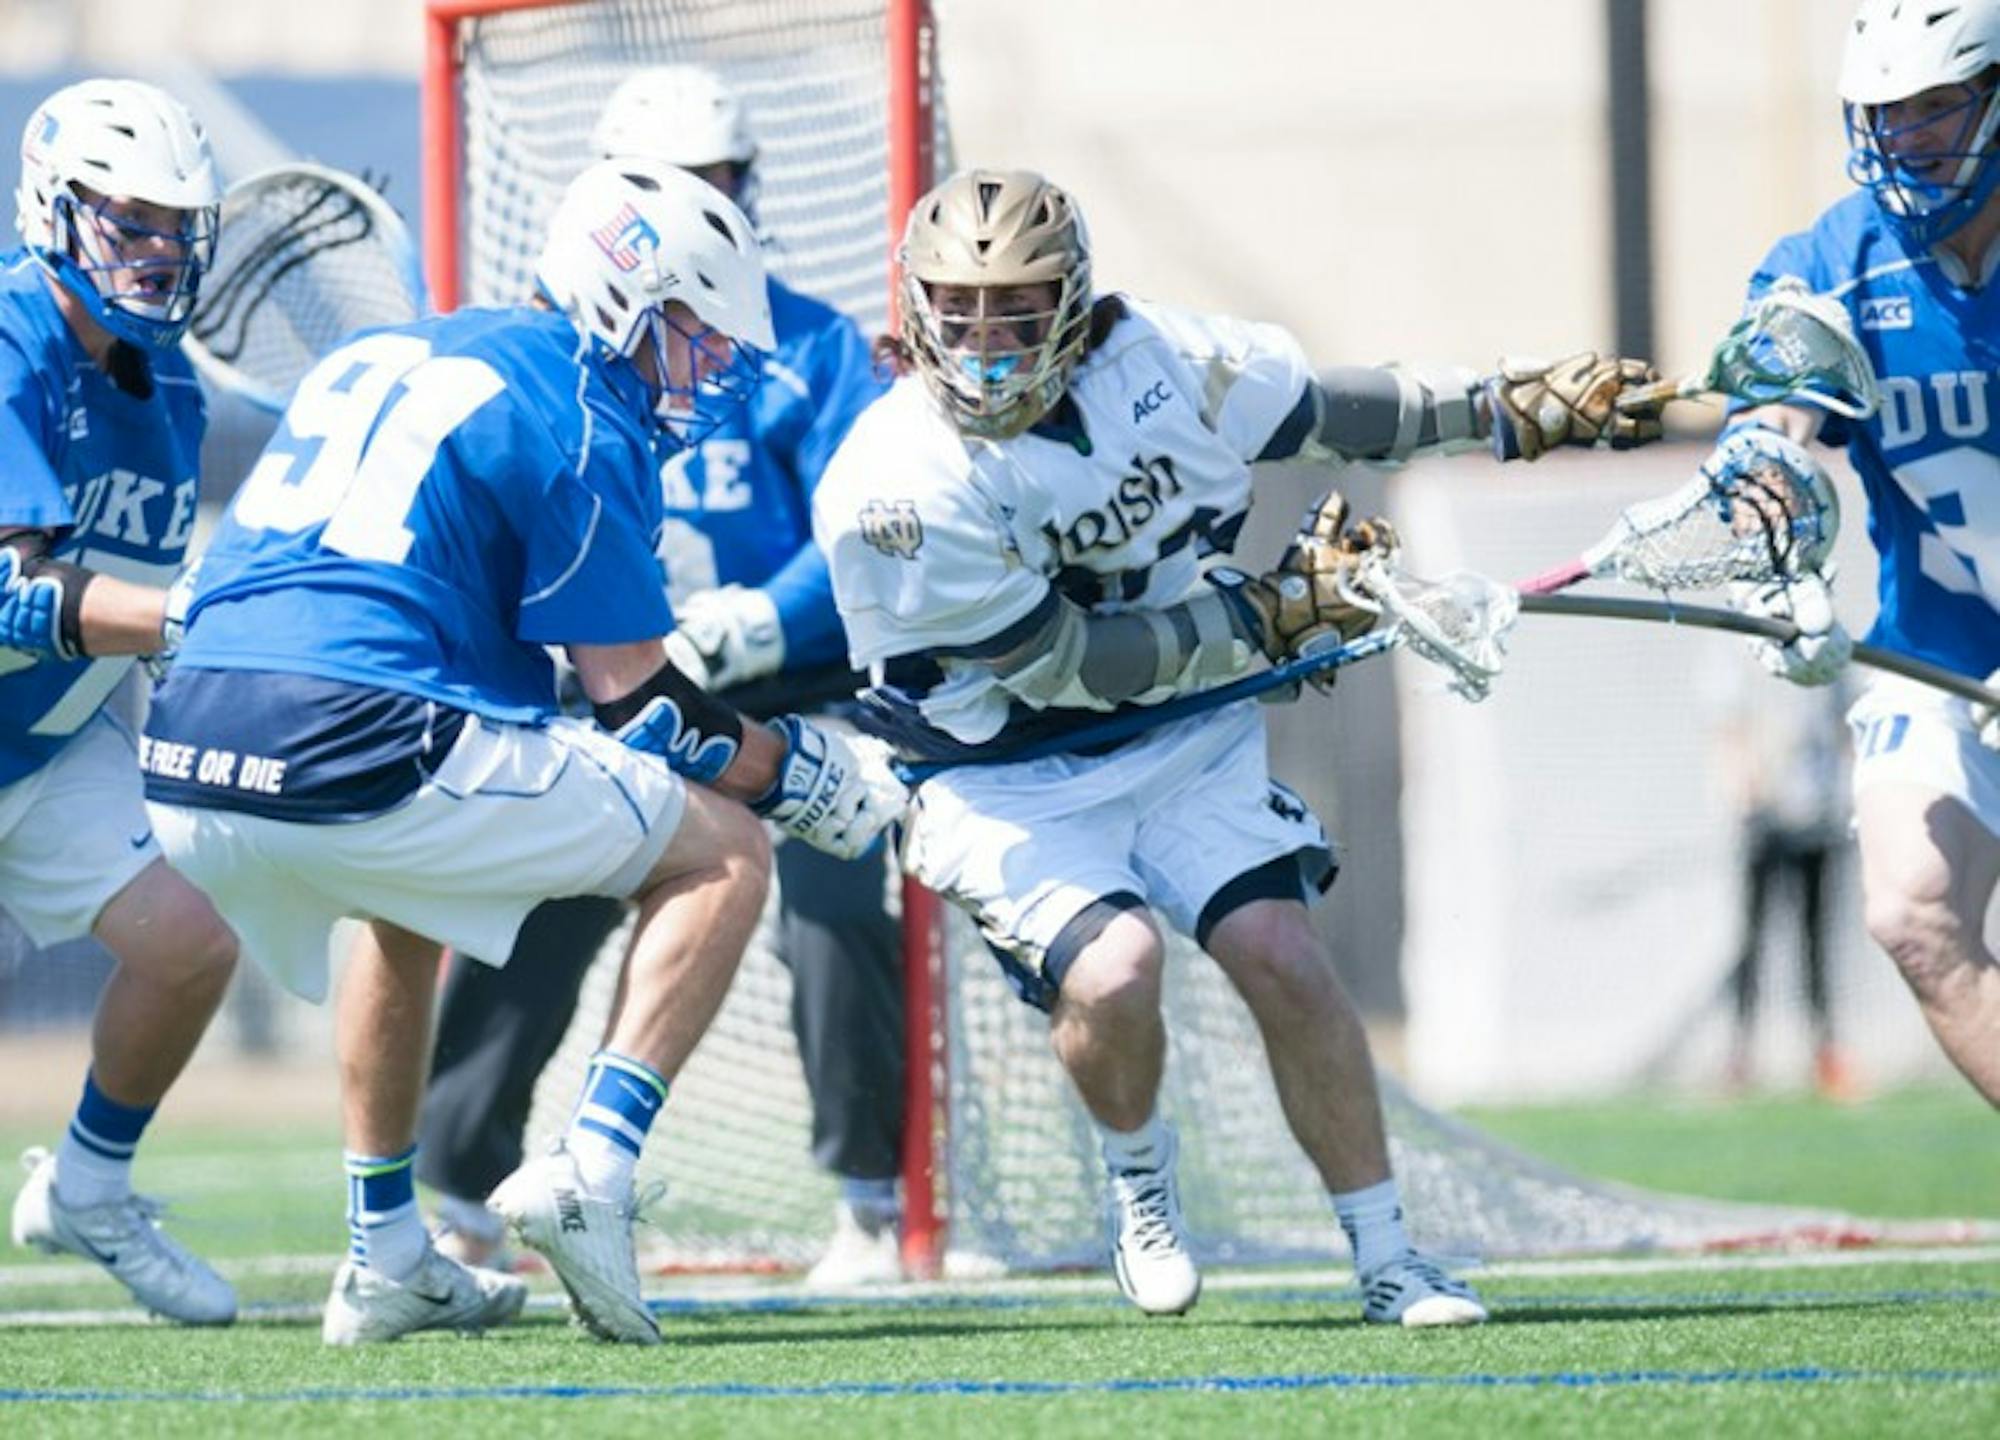 Sophomore attackman Matt Kavanagh tries to sneak past a defender during Notre Dame's 15-7 loss to the Blue Devils on April 5.